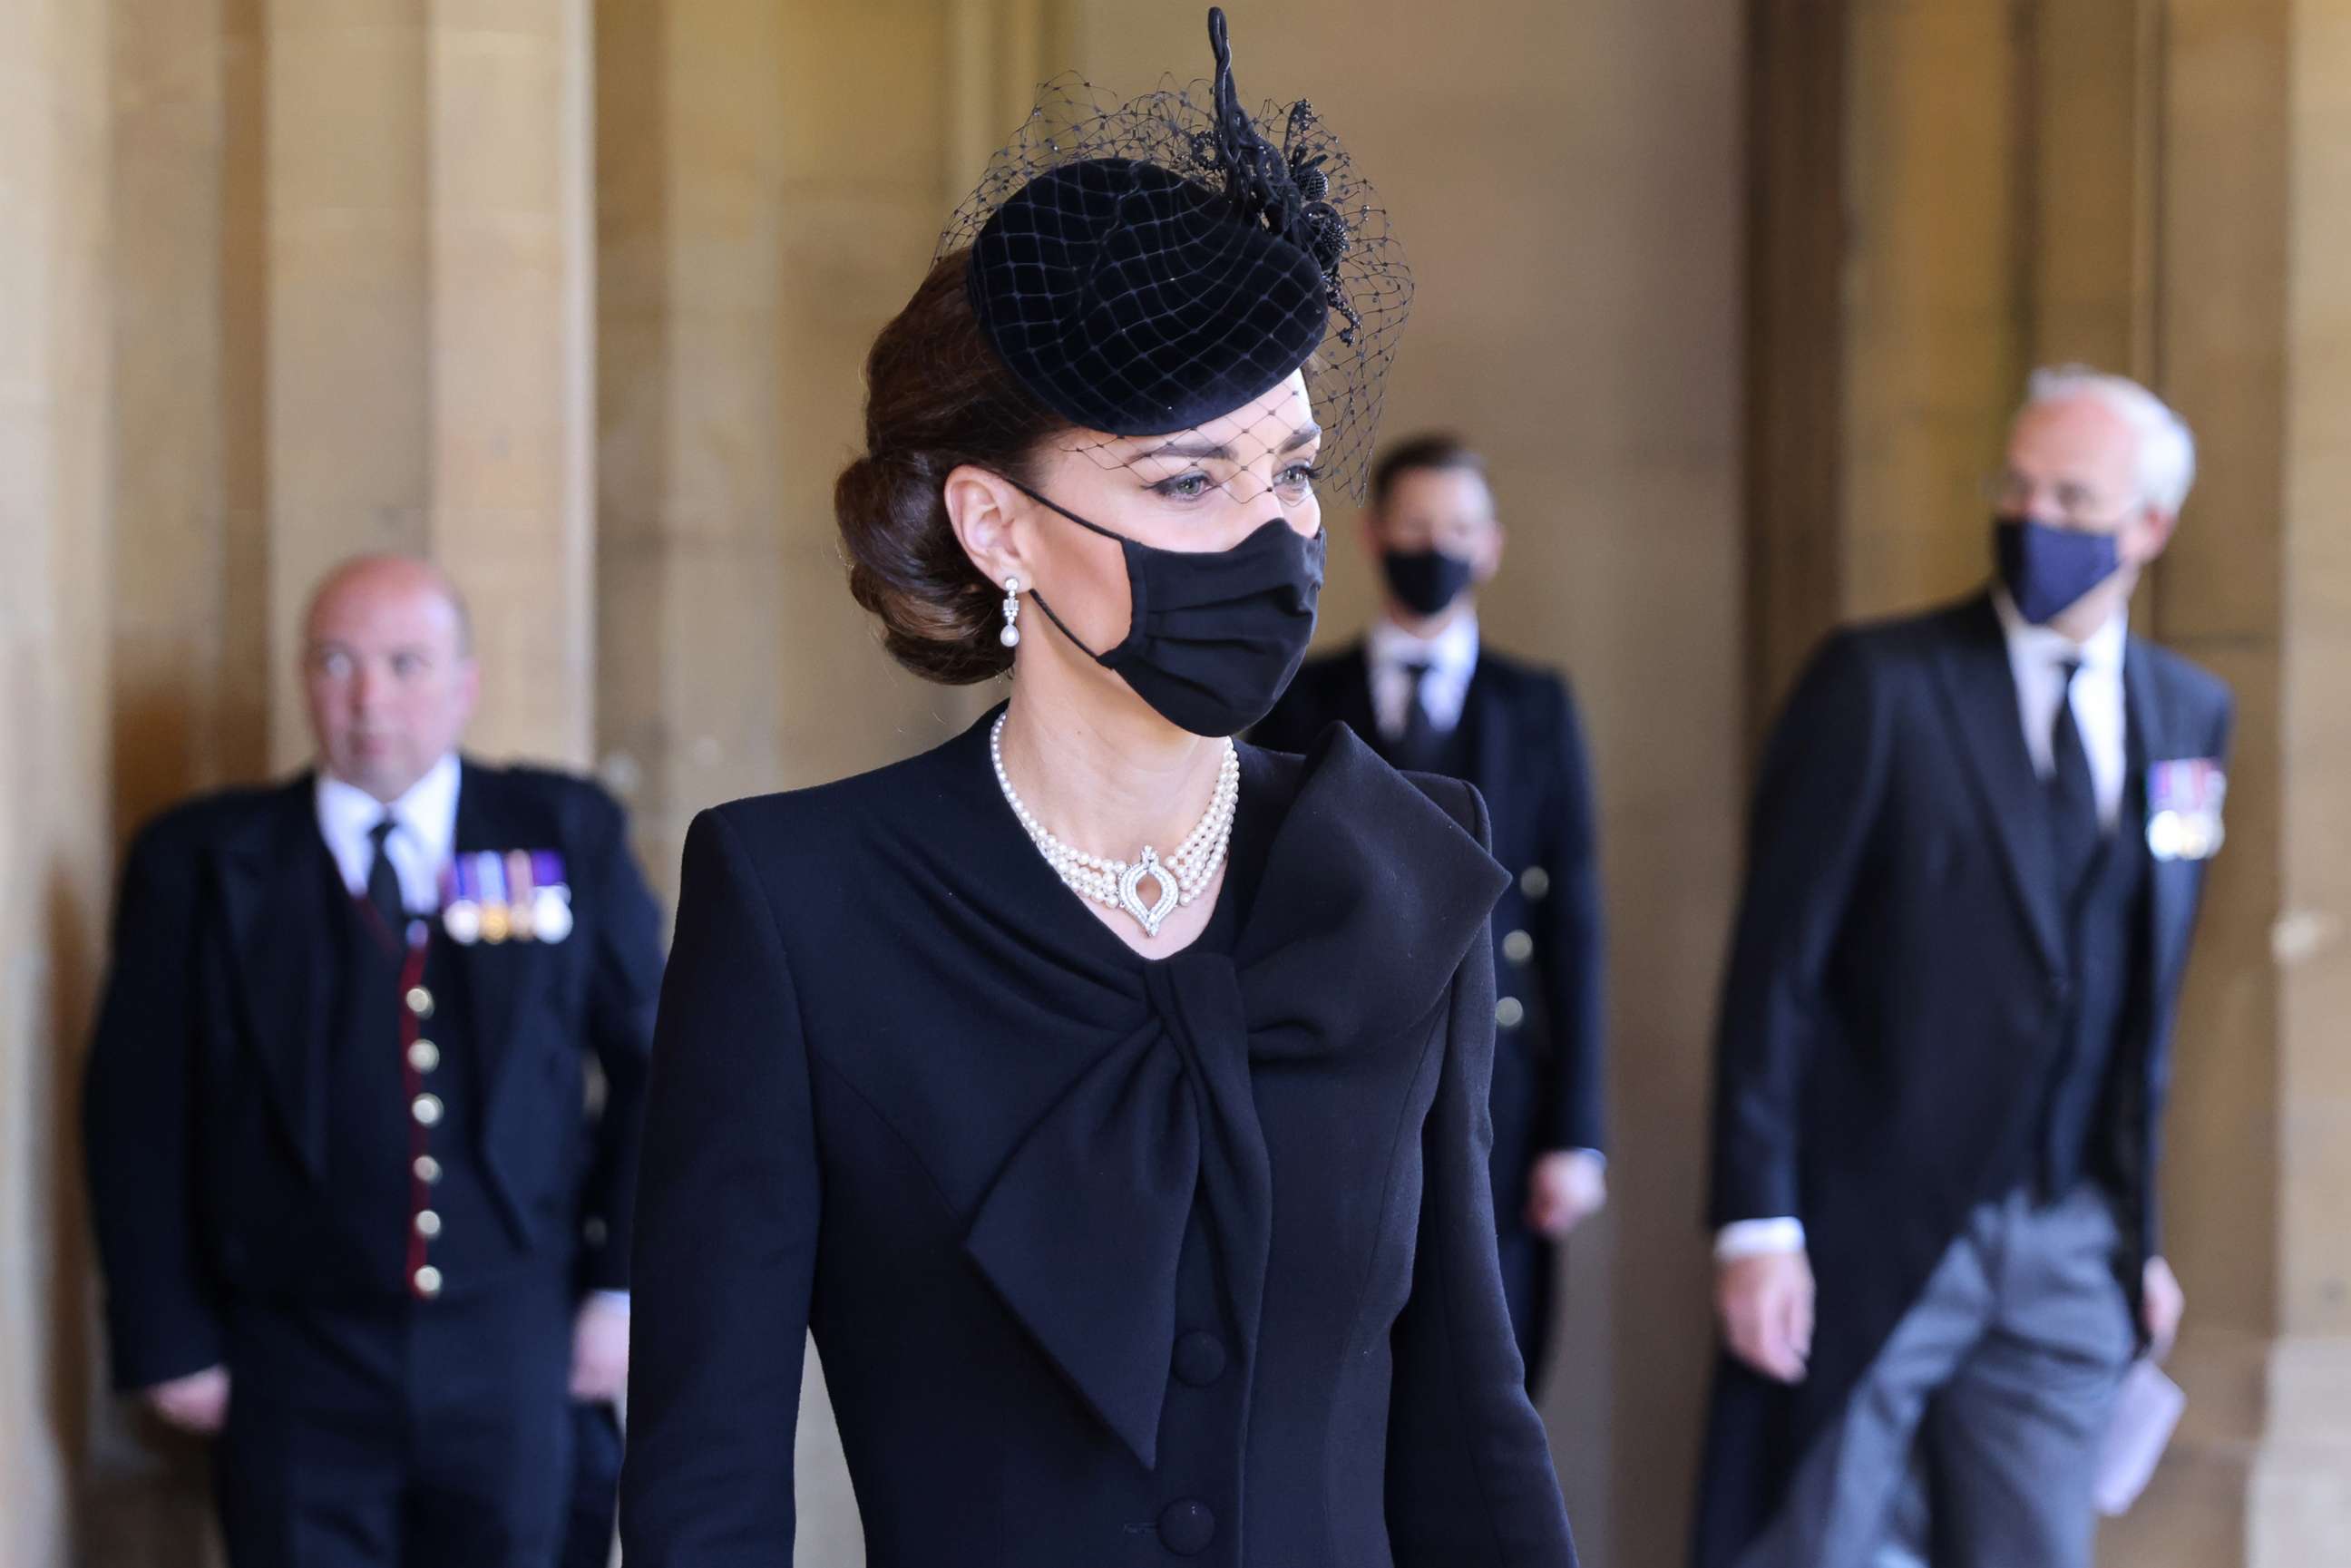 PHOTO: Catherine, Duchess of Cambridge  during the funeral of Prince Philip, Duke of Edinburgh at Windsor Castle on April 17, 2021, in Windsor, England.